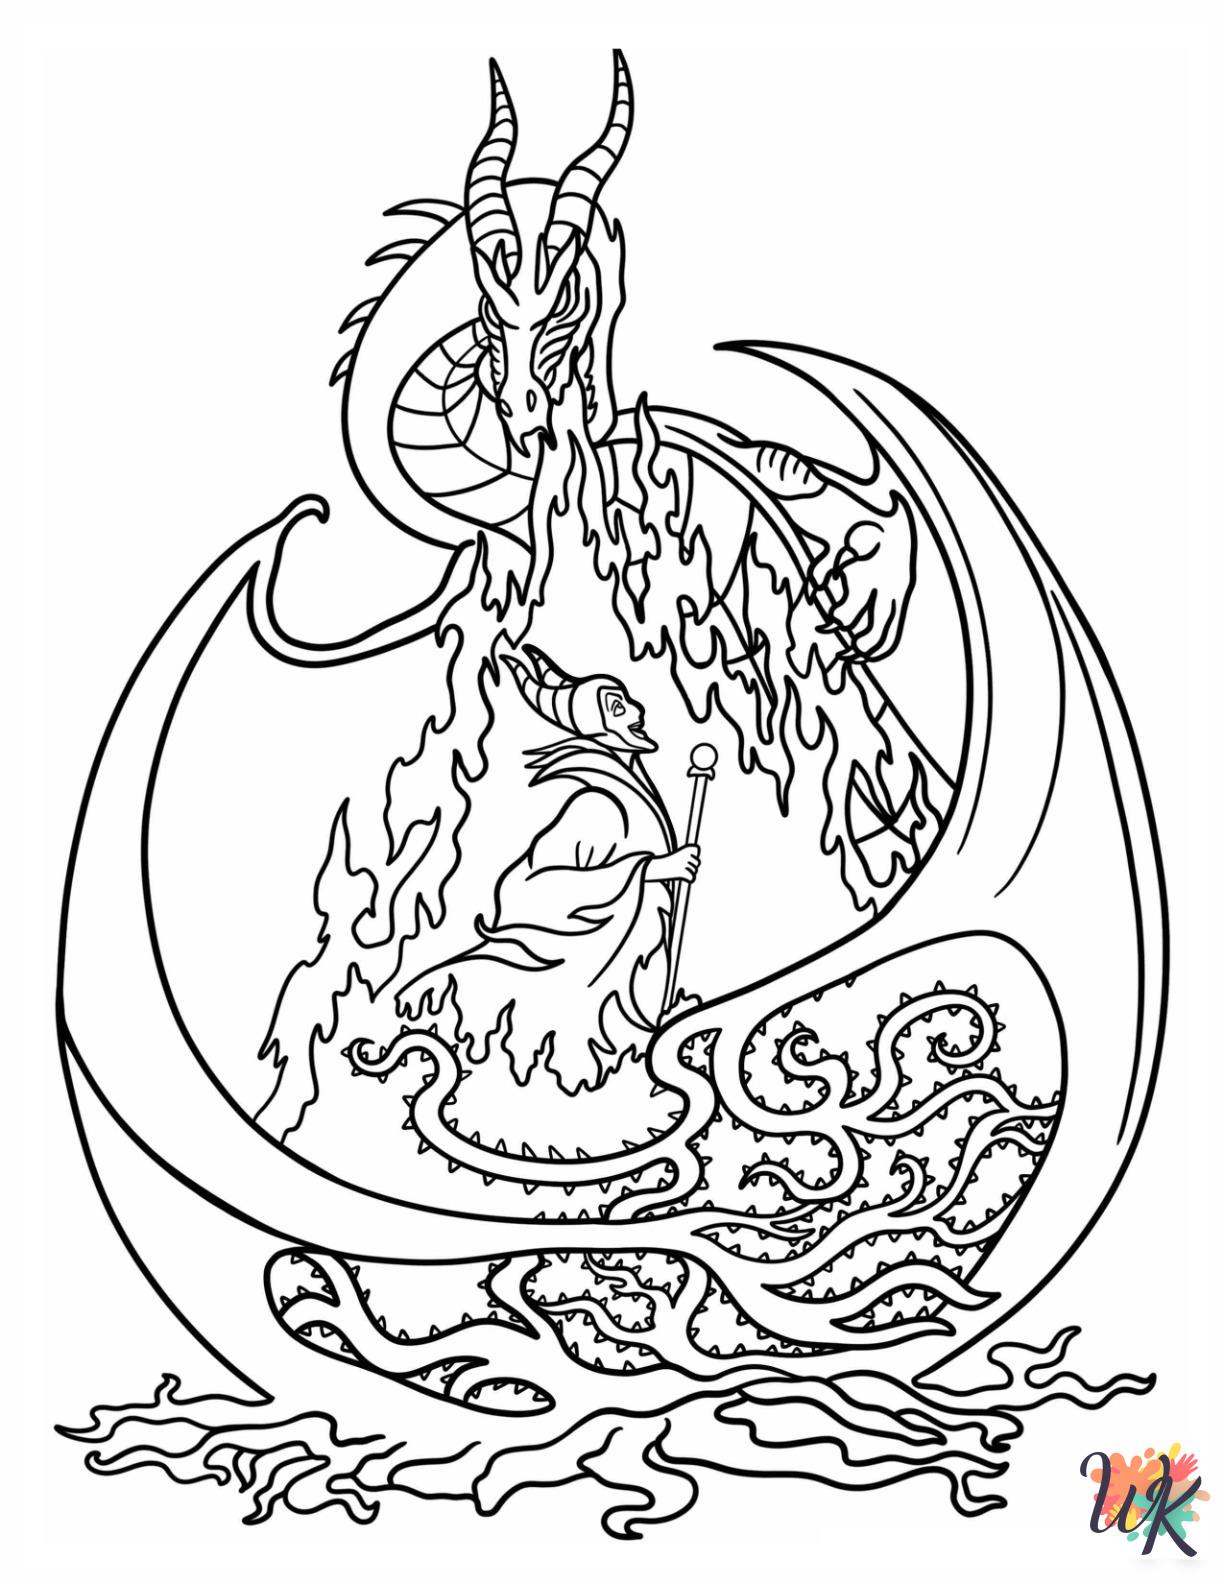 Maleficent themed coloring pages